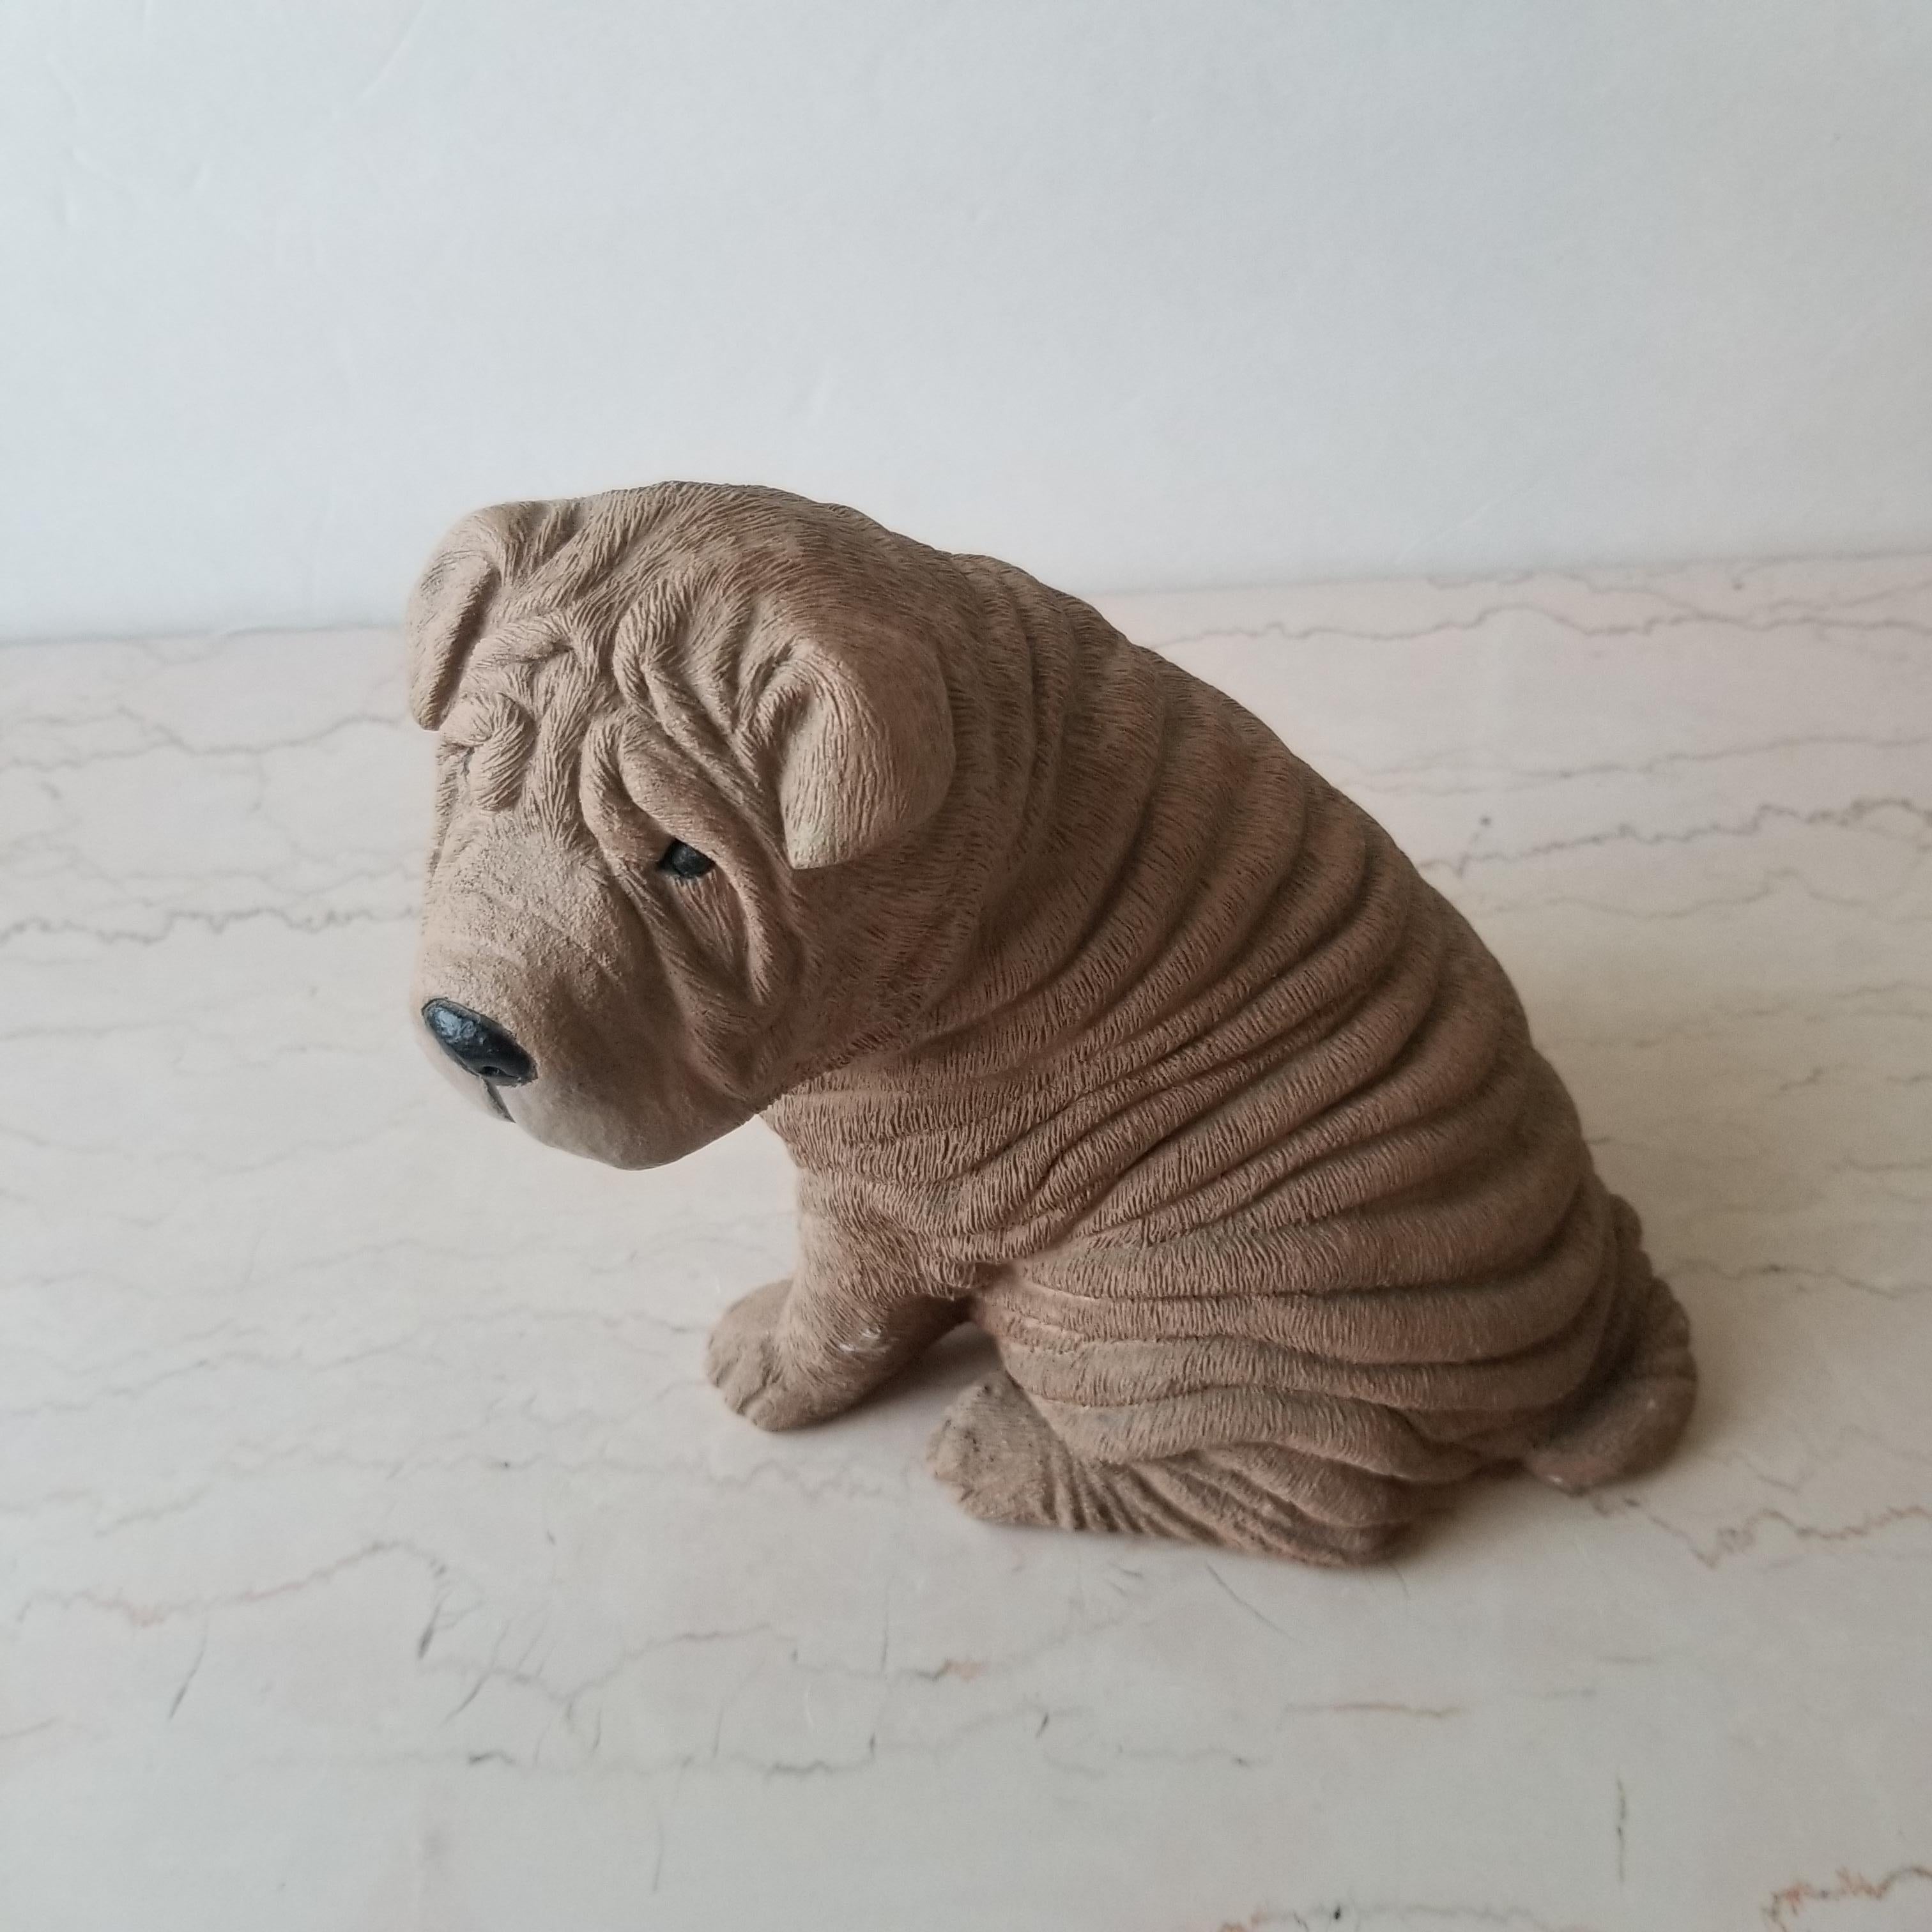 Clay 1986 Chinese Shar Pei Dog Sculpture Sandicast by Sandra Brue San Diego CA For Sale